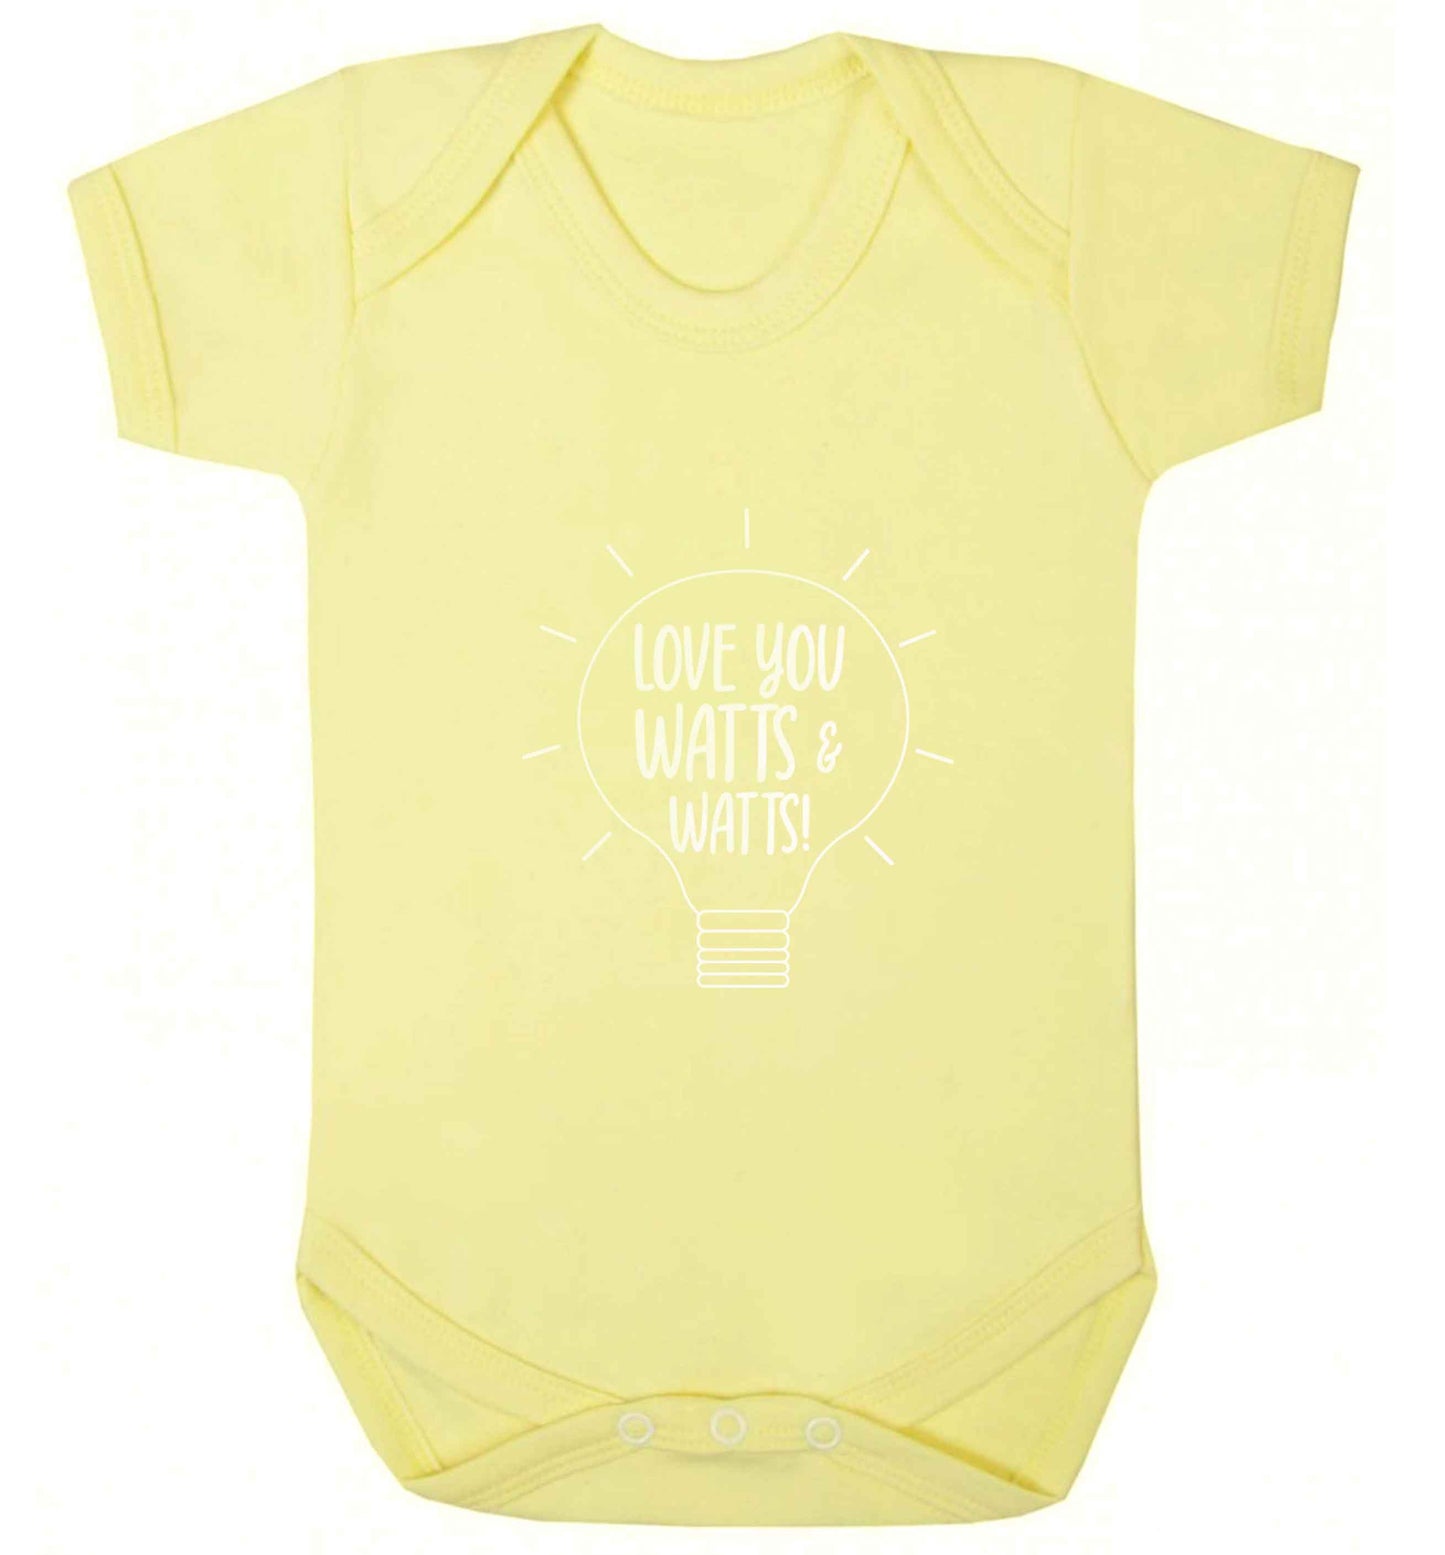 I love you watts and watts baby vest pale yellow 18-24 months